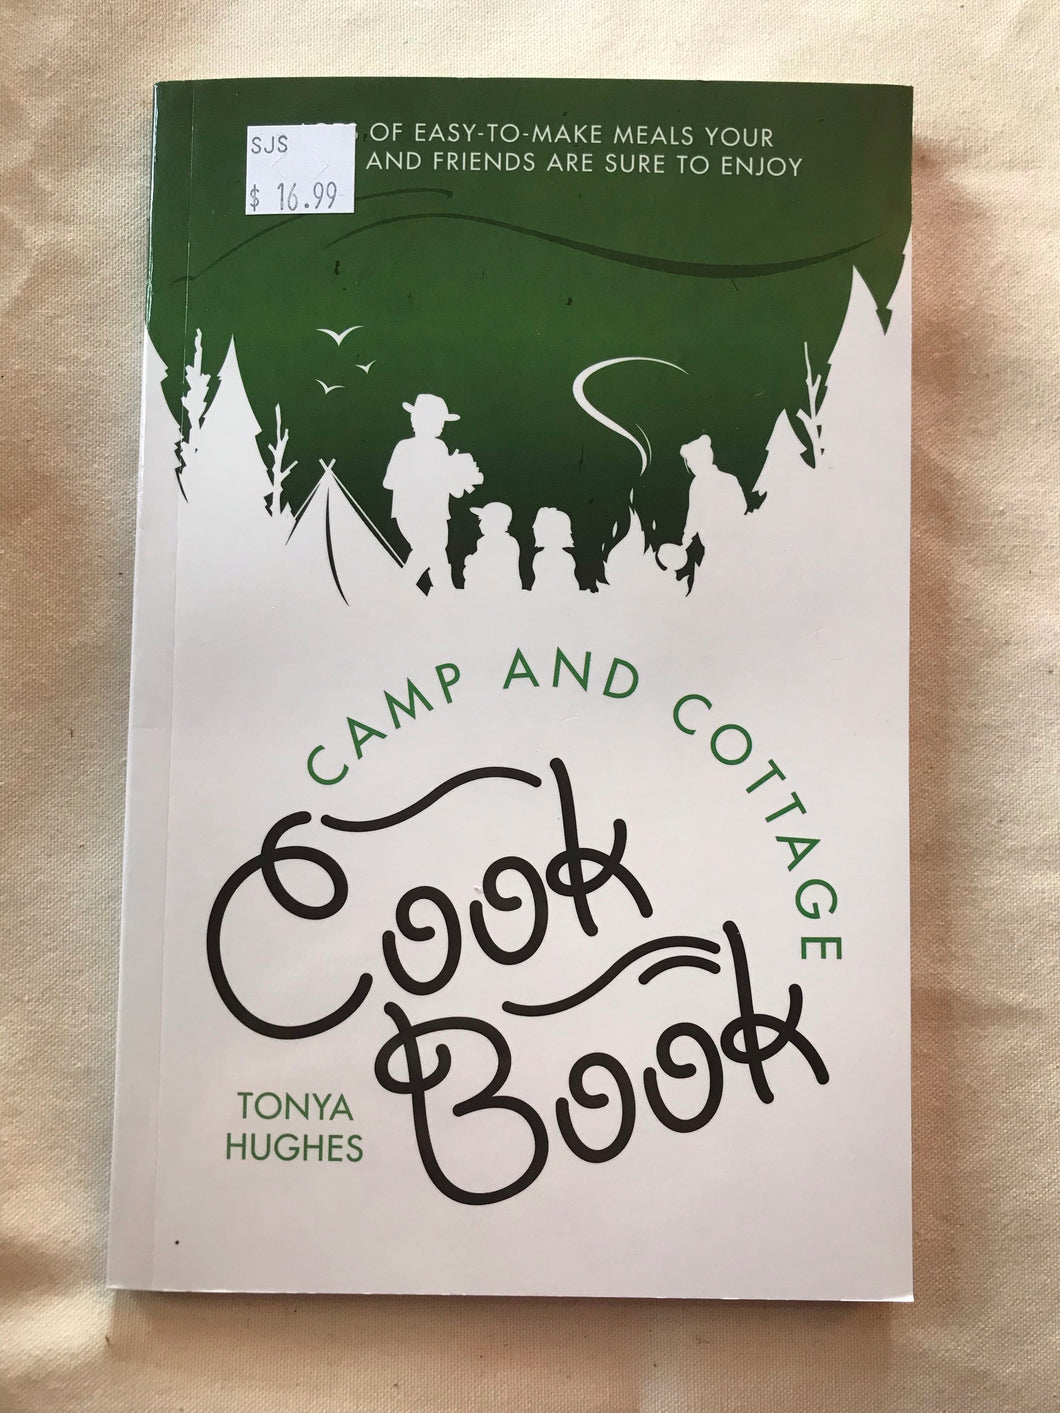 Camp and Cottage Cookbook